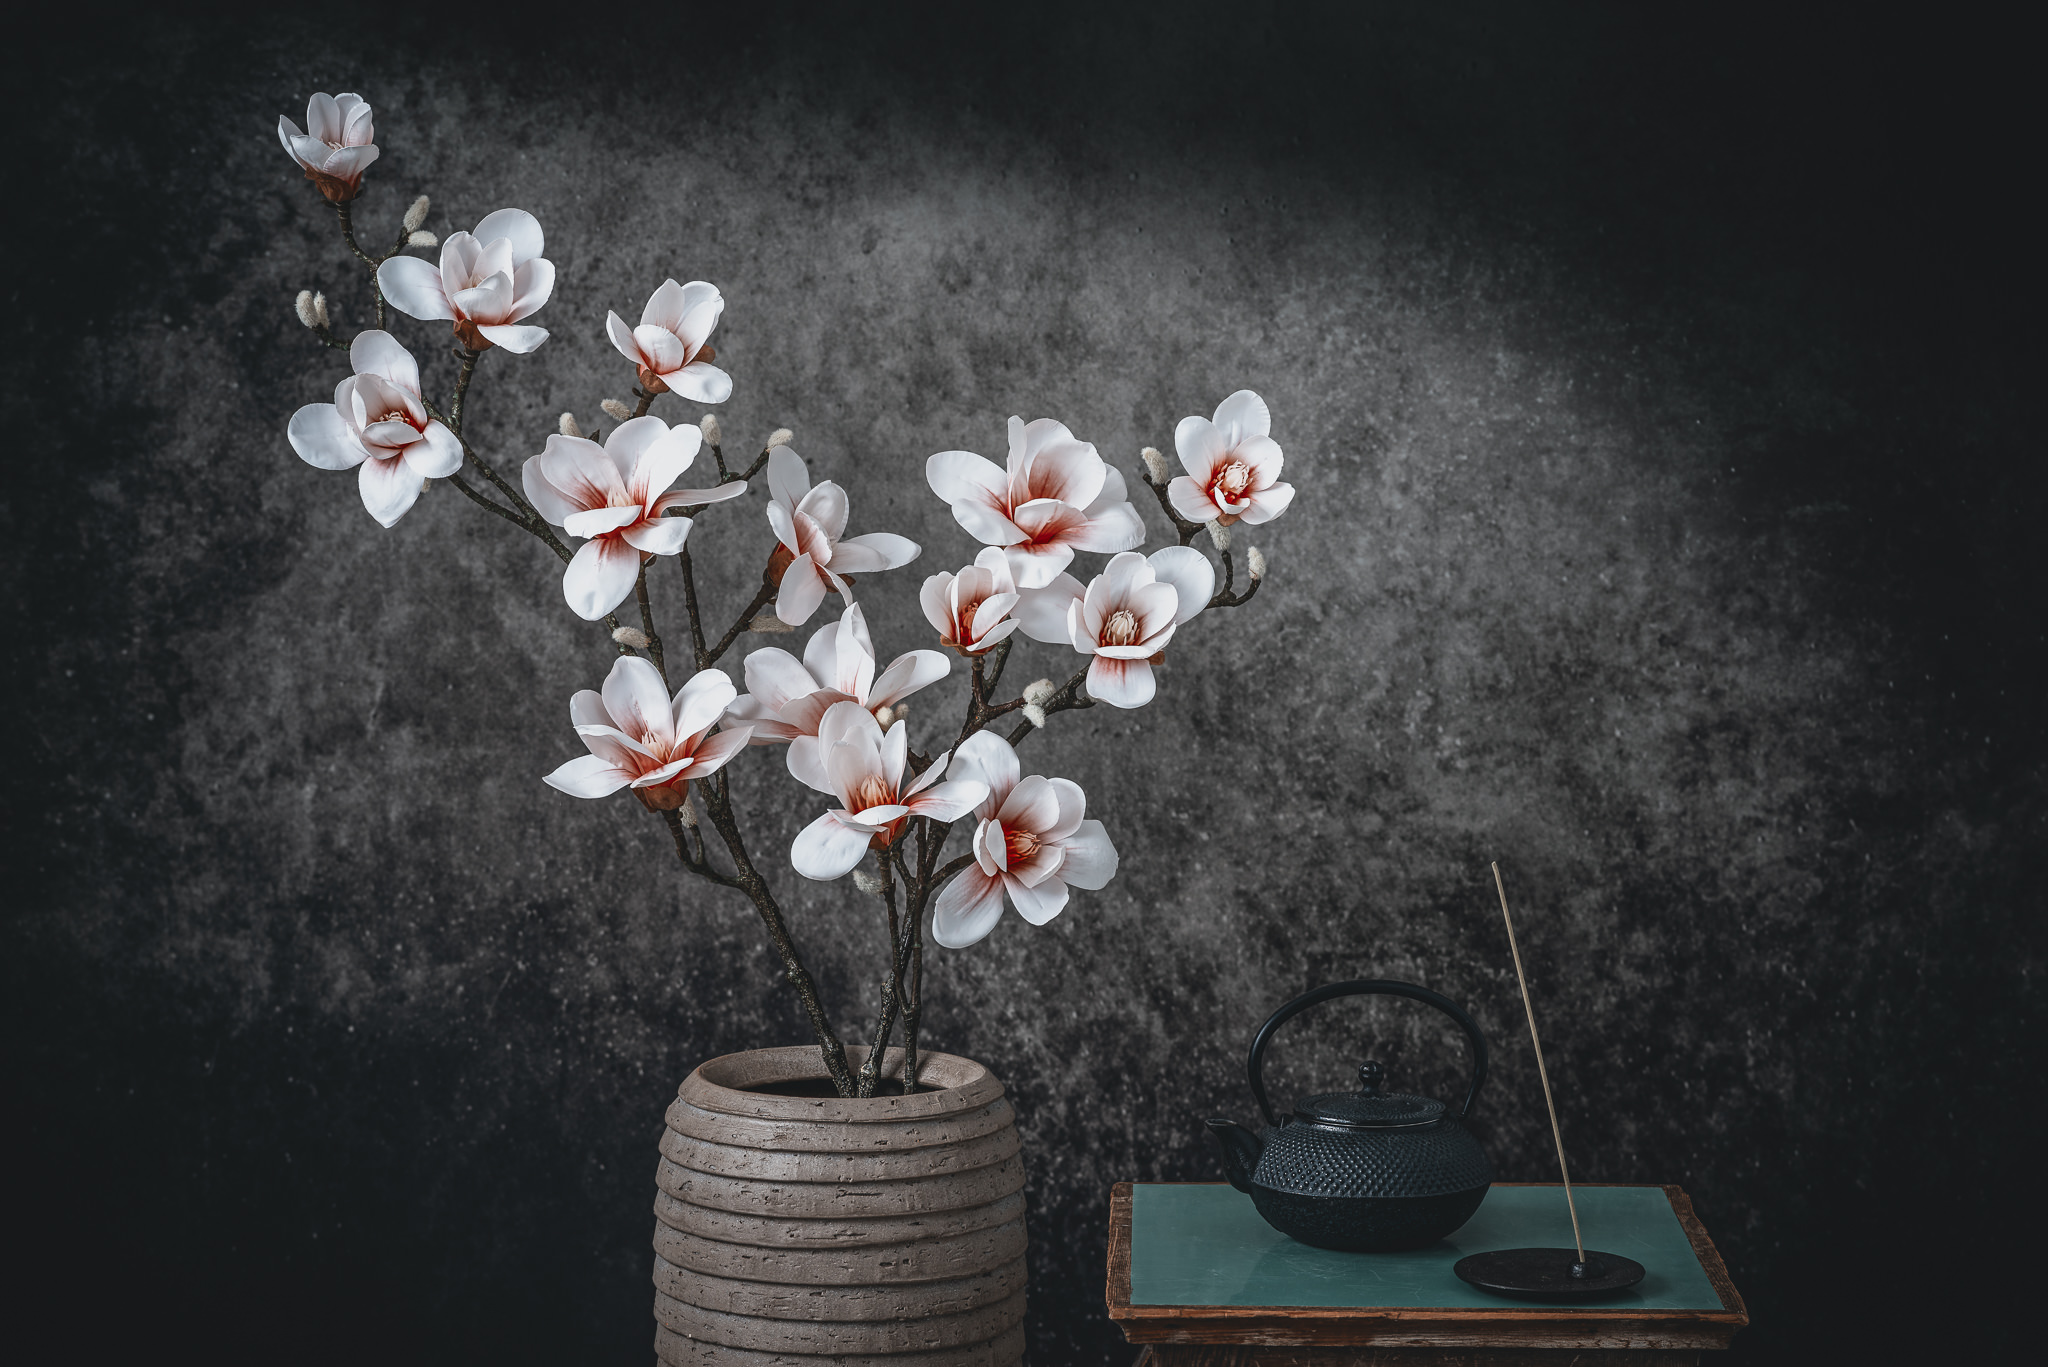 Magnolias in Japan Still Life Photograph as Cover Art